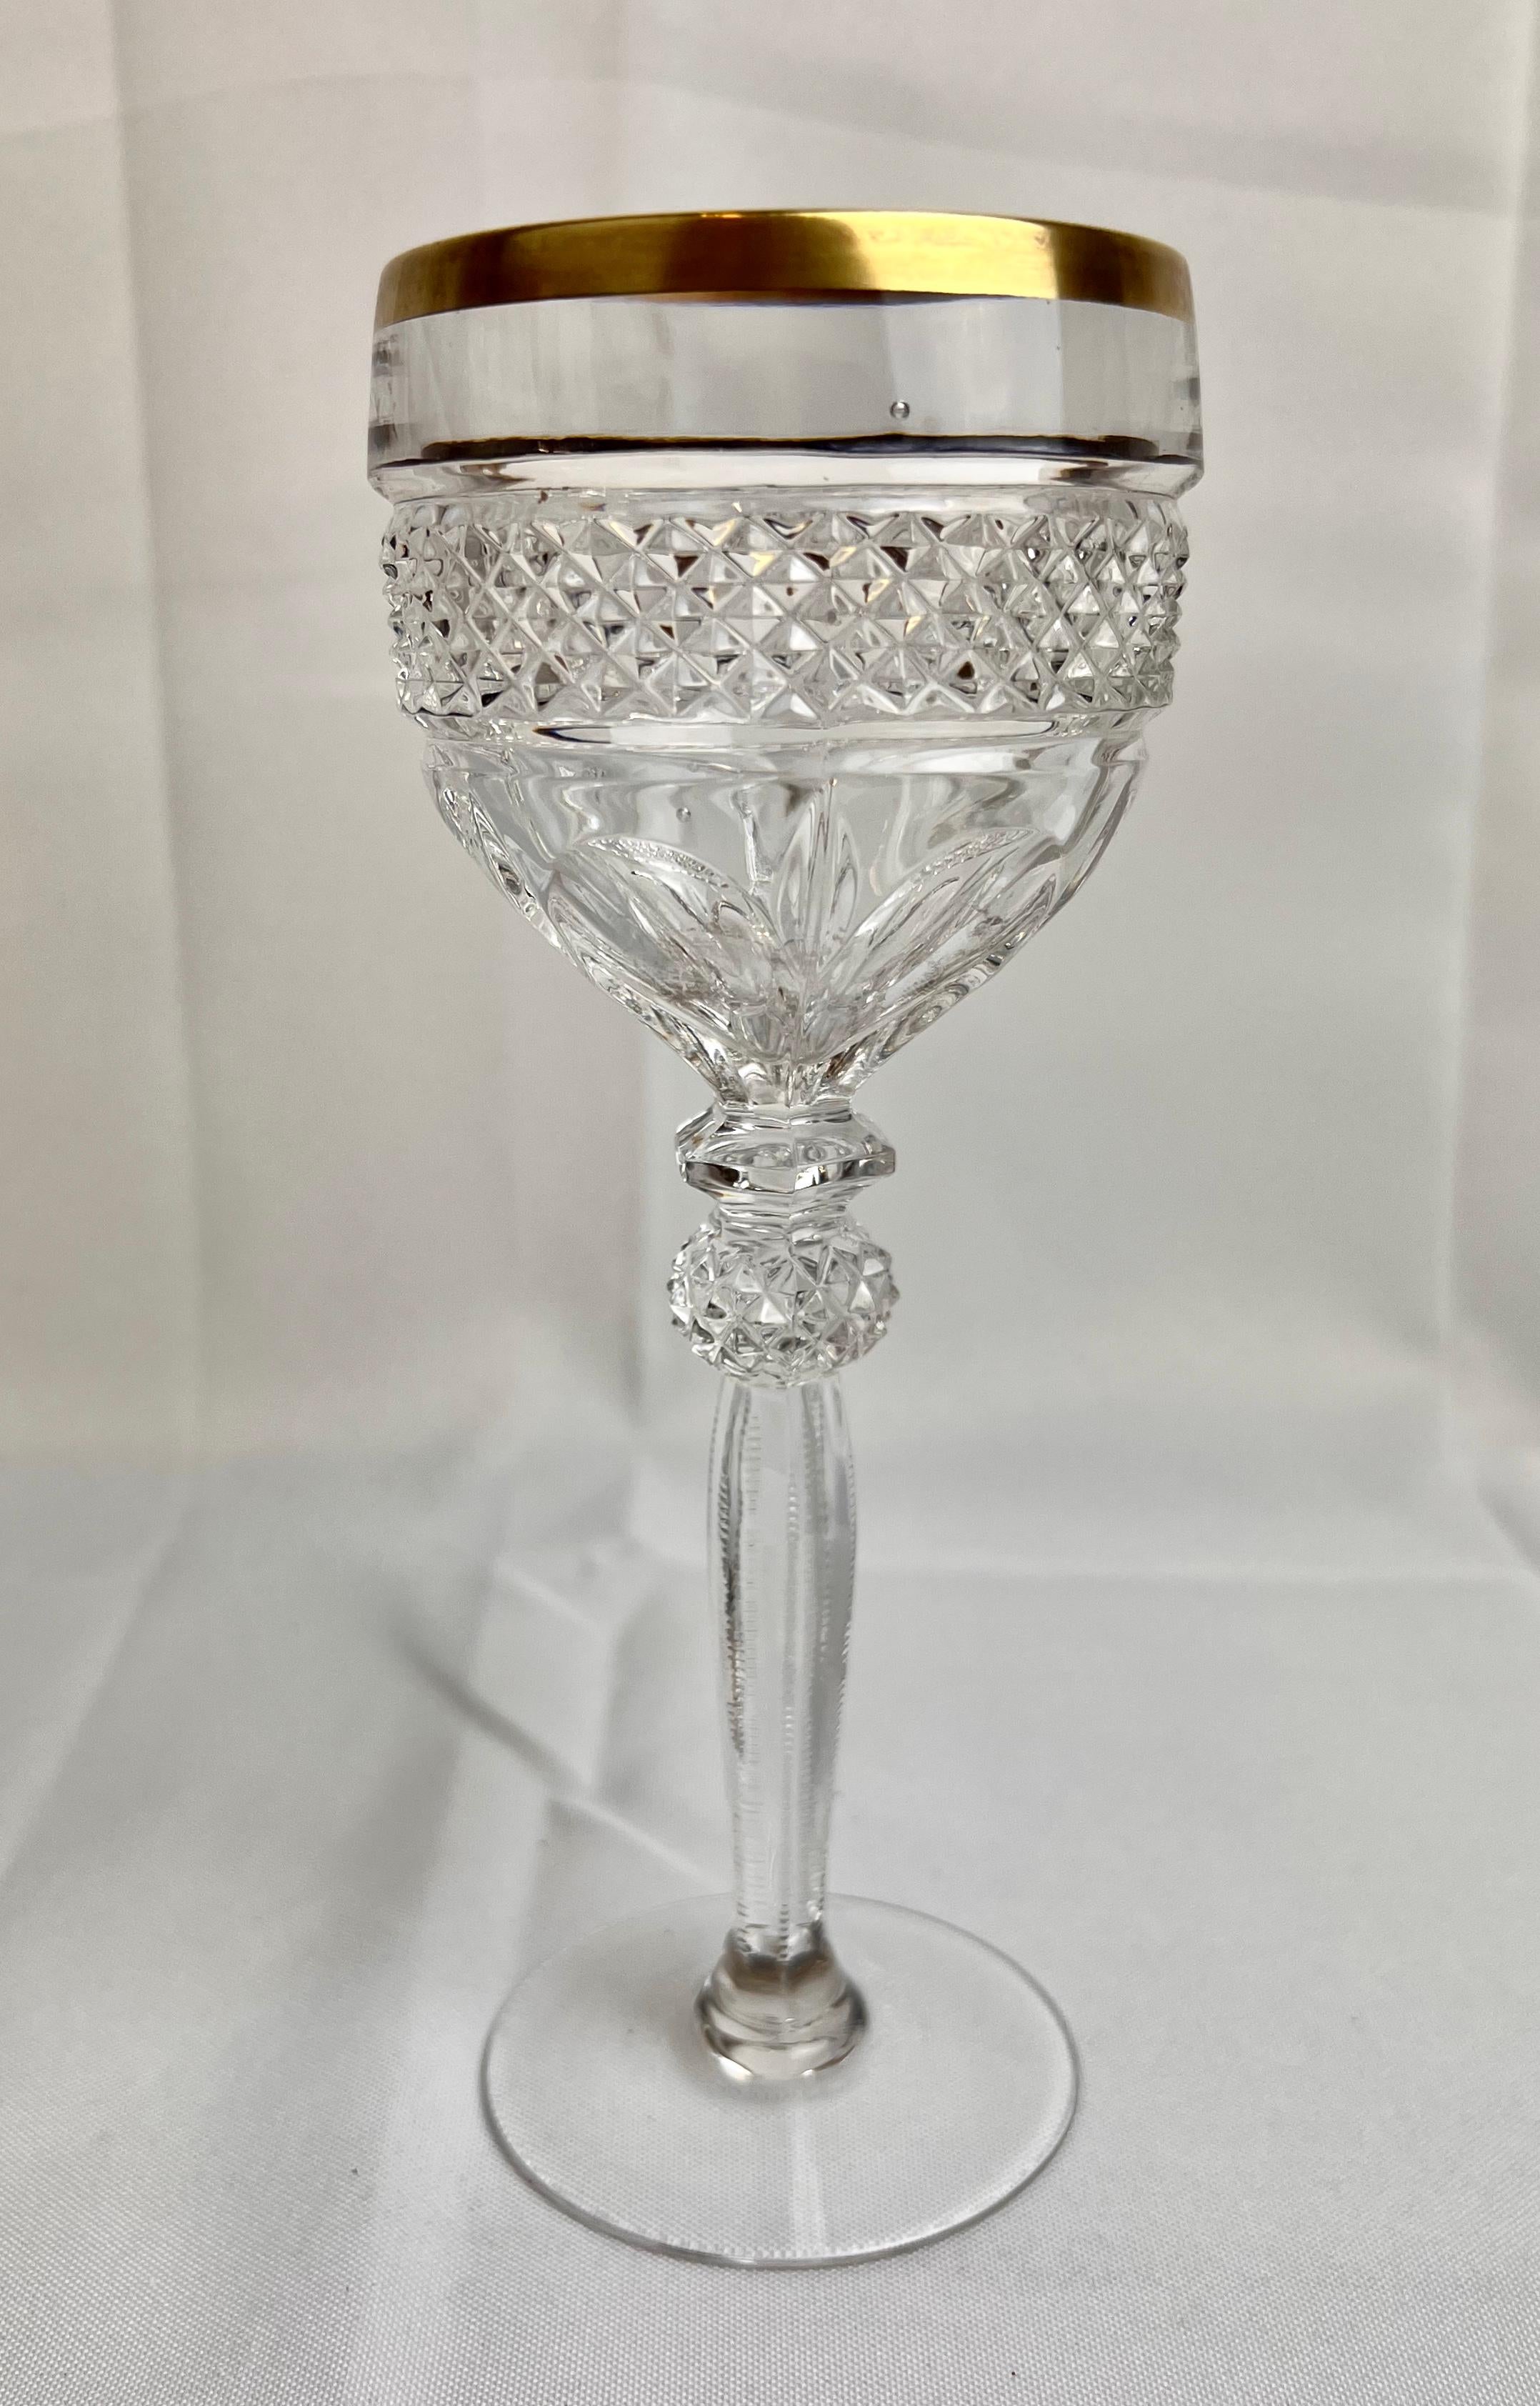 Set of four gilt edged cut crystal wine glasses. They have a nice heft in the hand and reflect light nicely. At 8